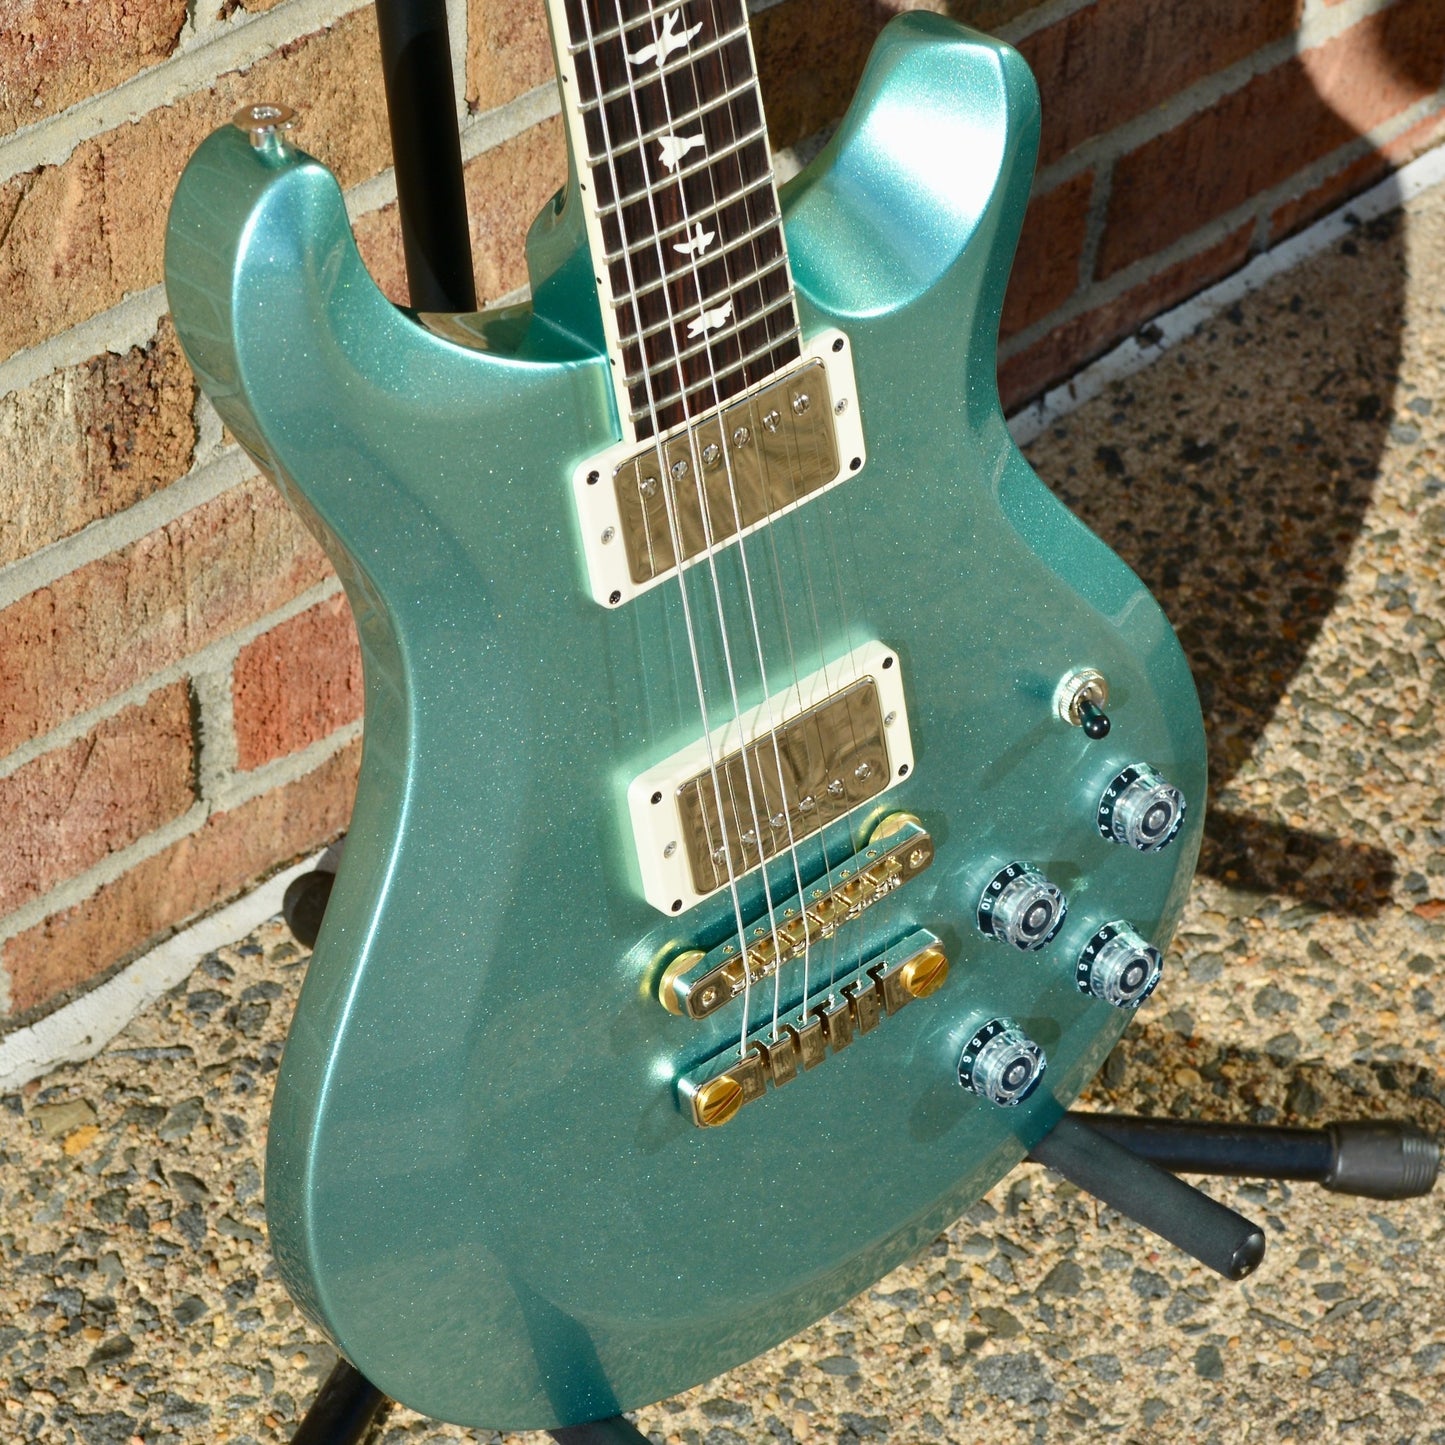 PRS S2 McCarty 594 Thinline